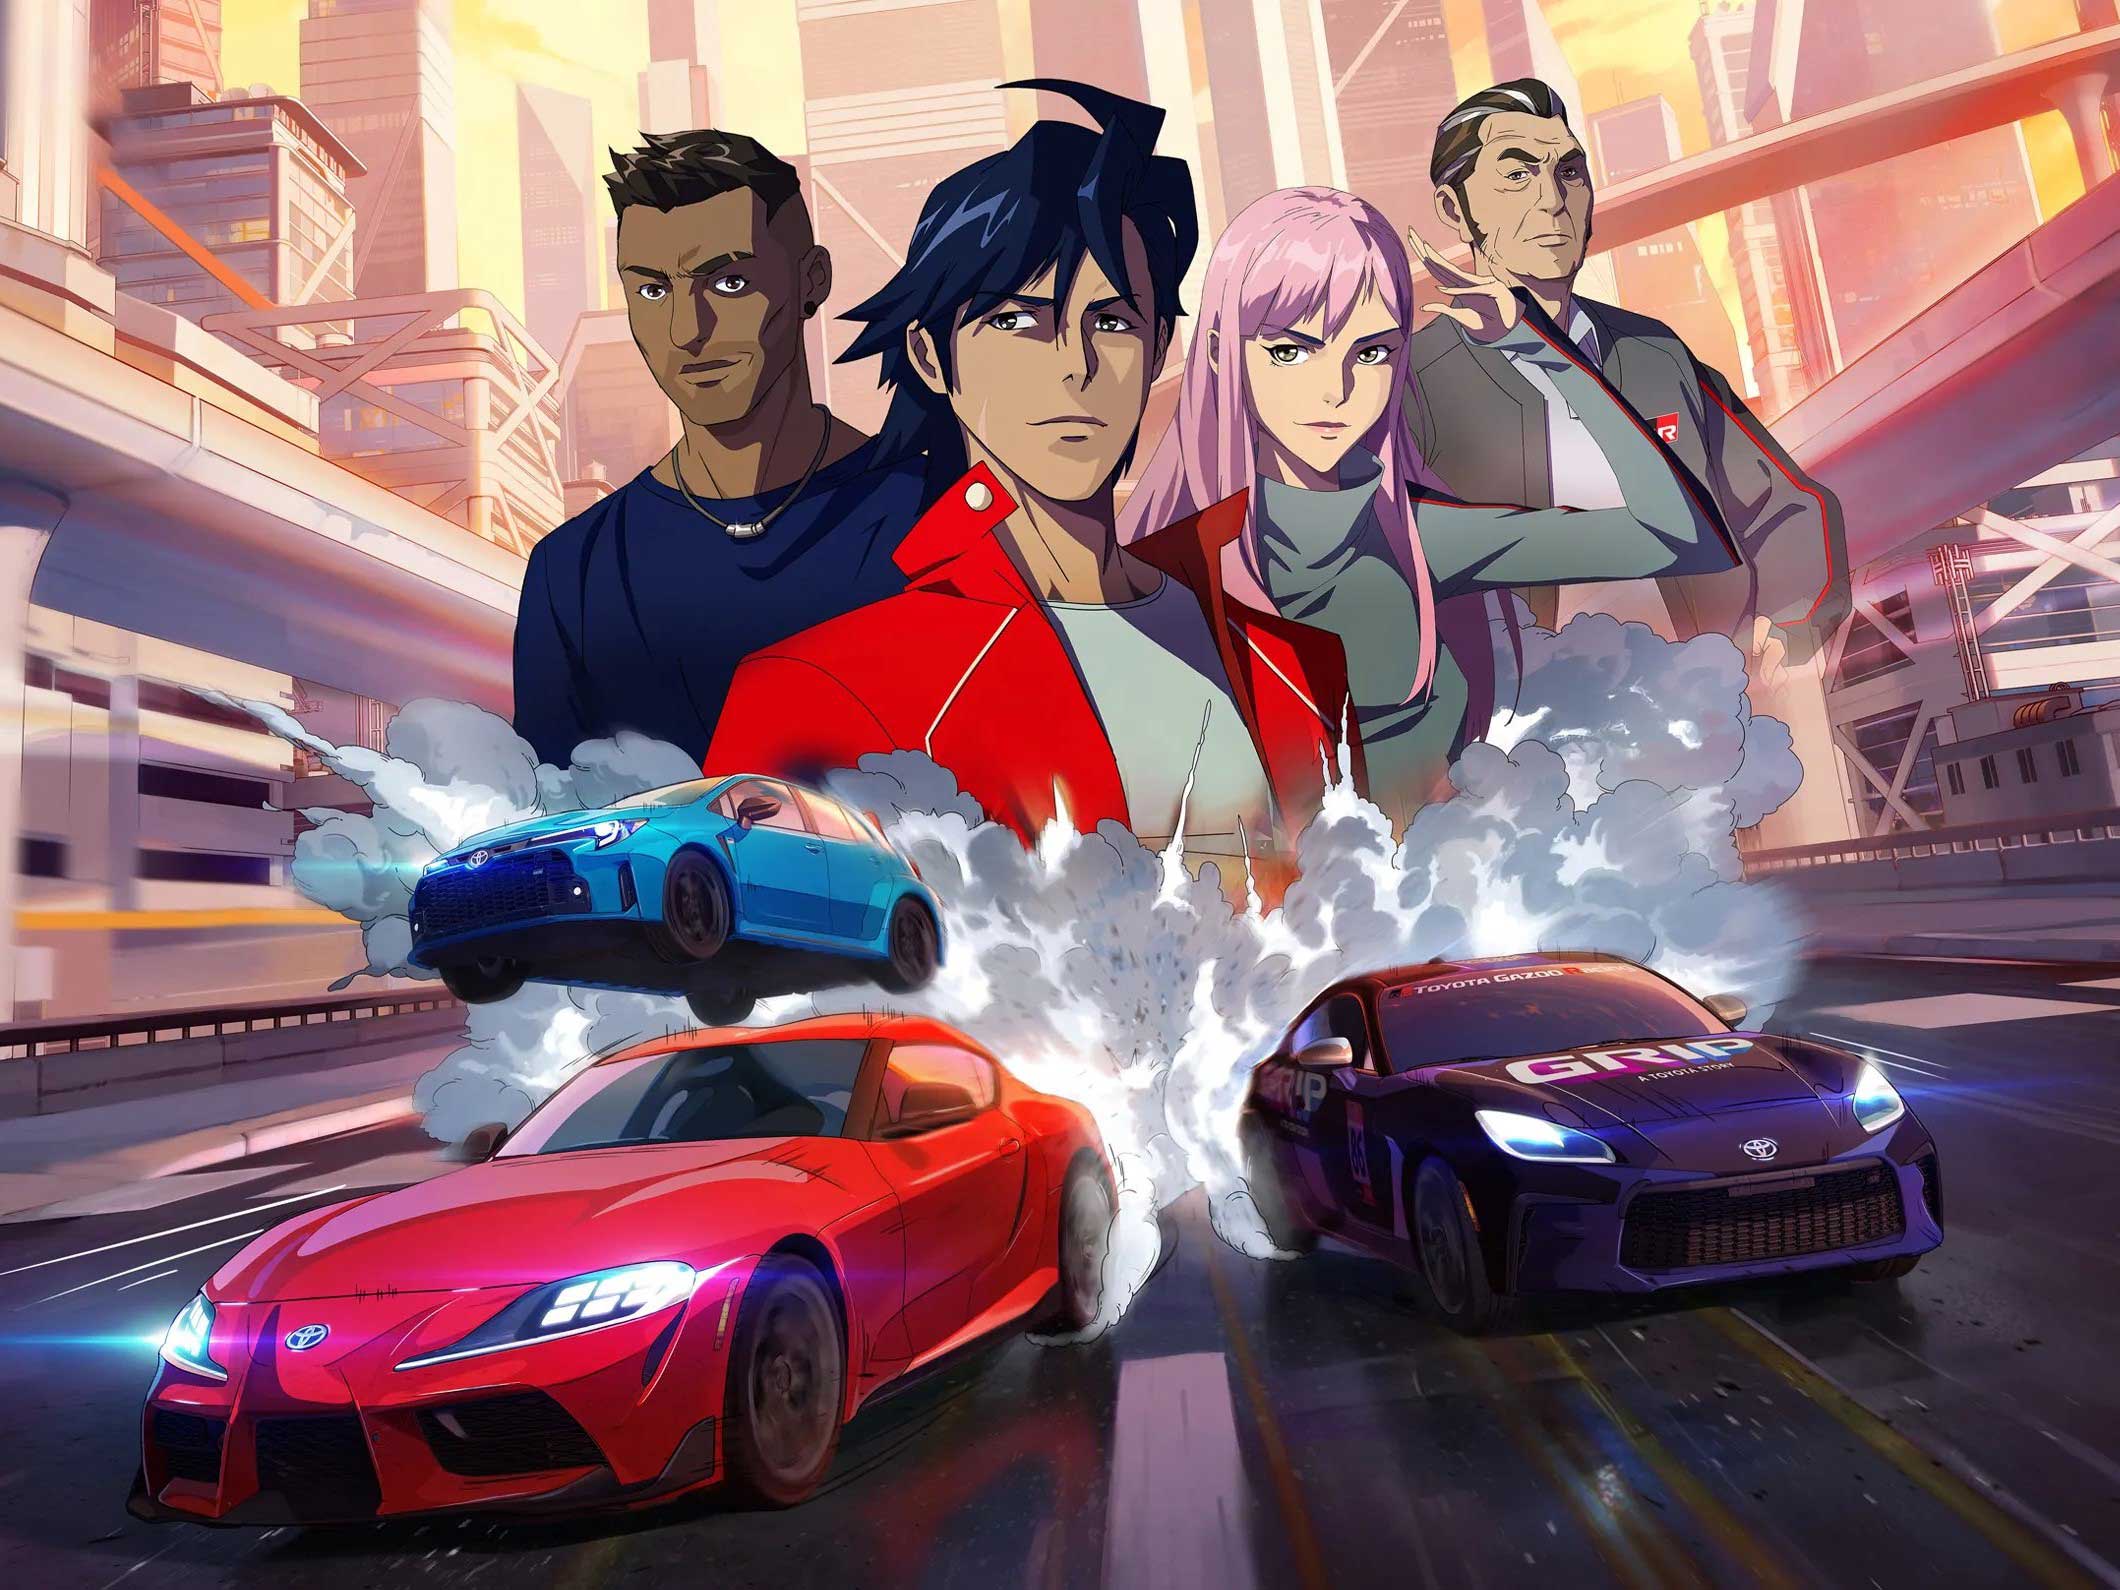 Toyota Enters Anime Scene with GRIP, an Initial D Inspired Original Animation